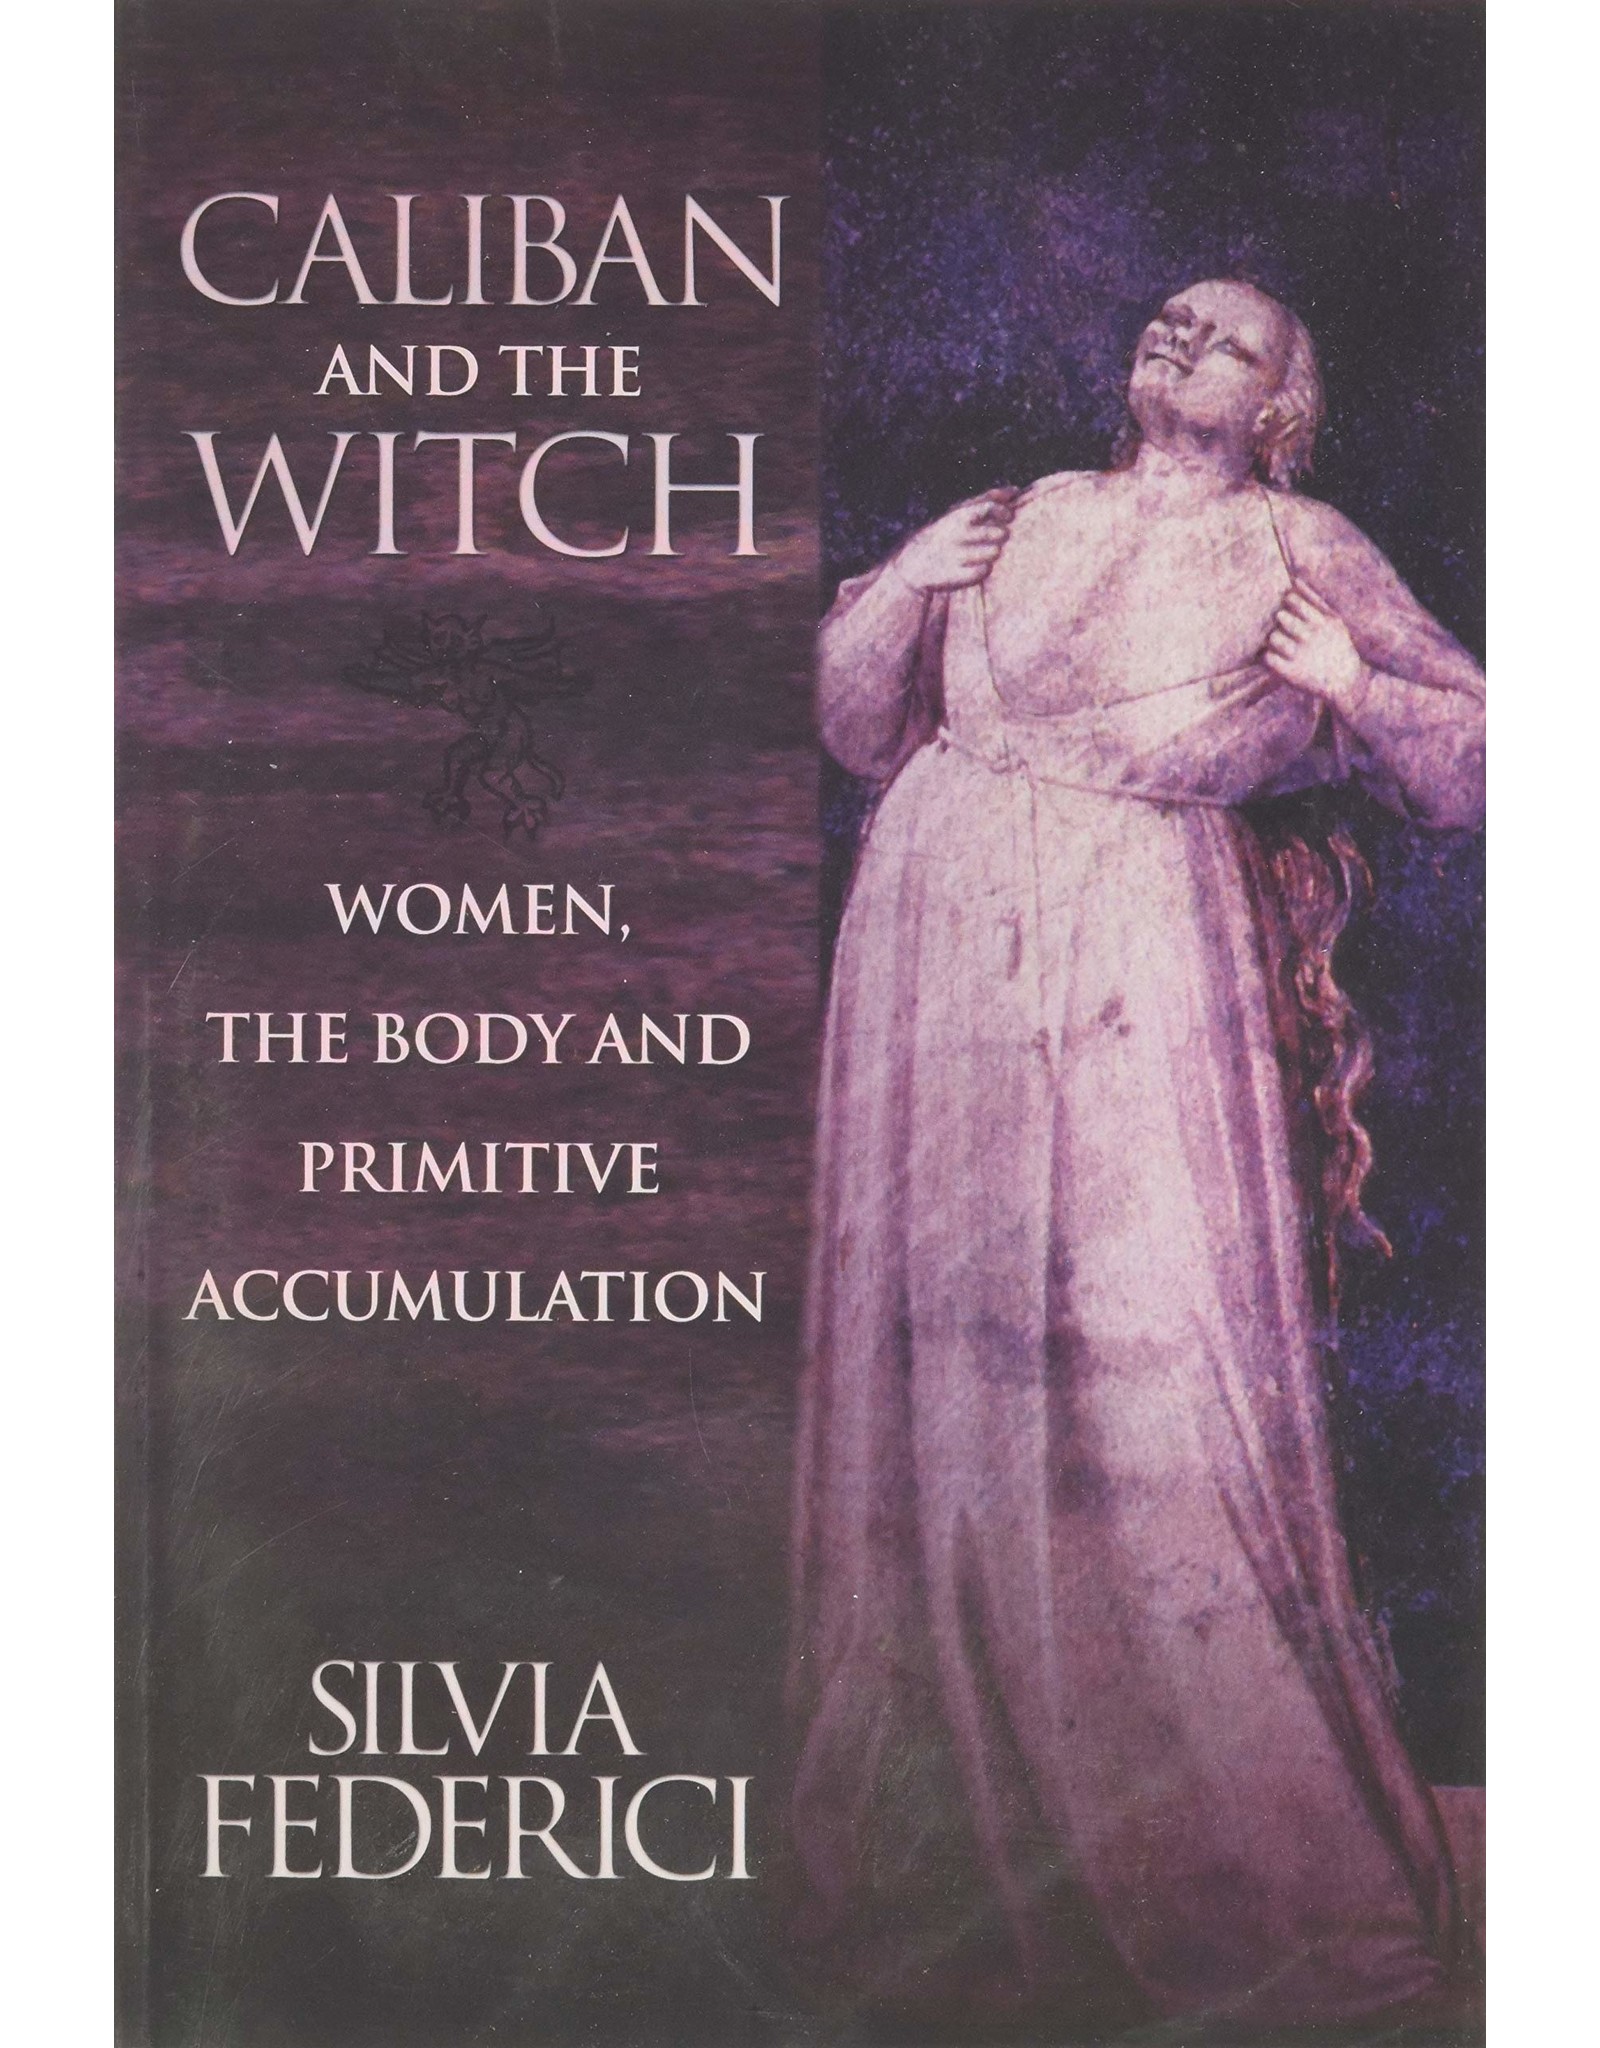 Literature Caliban & the Witch: Women, the Body, and Primitive Accumulation